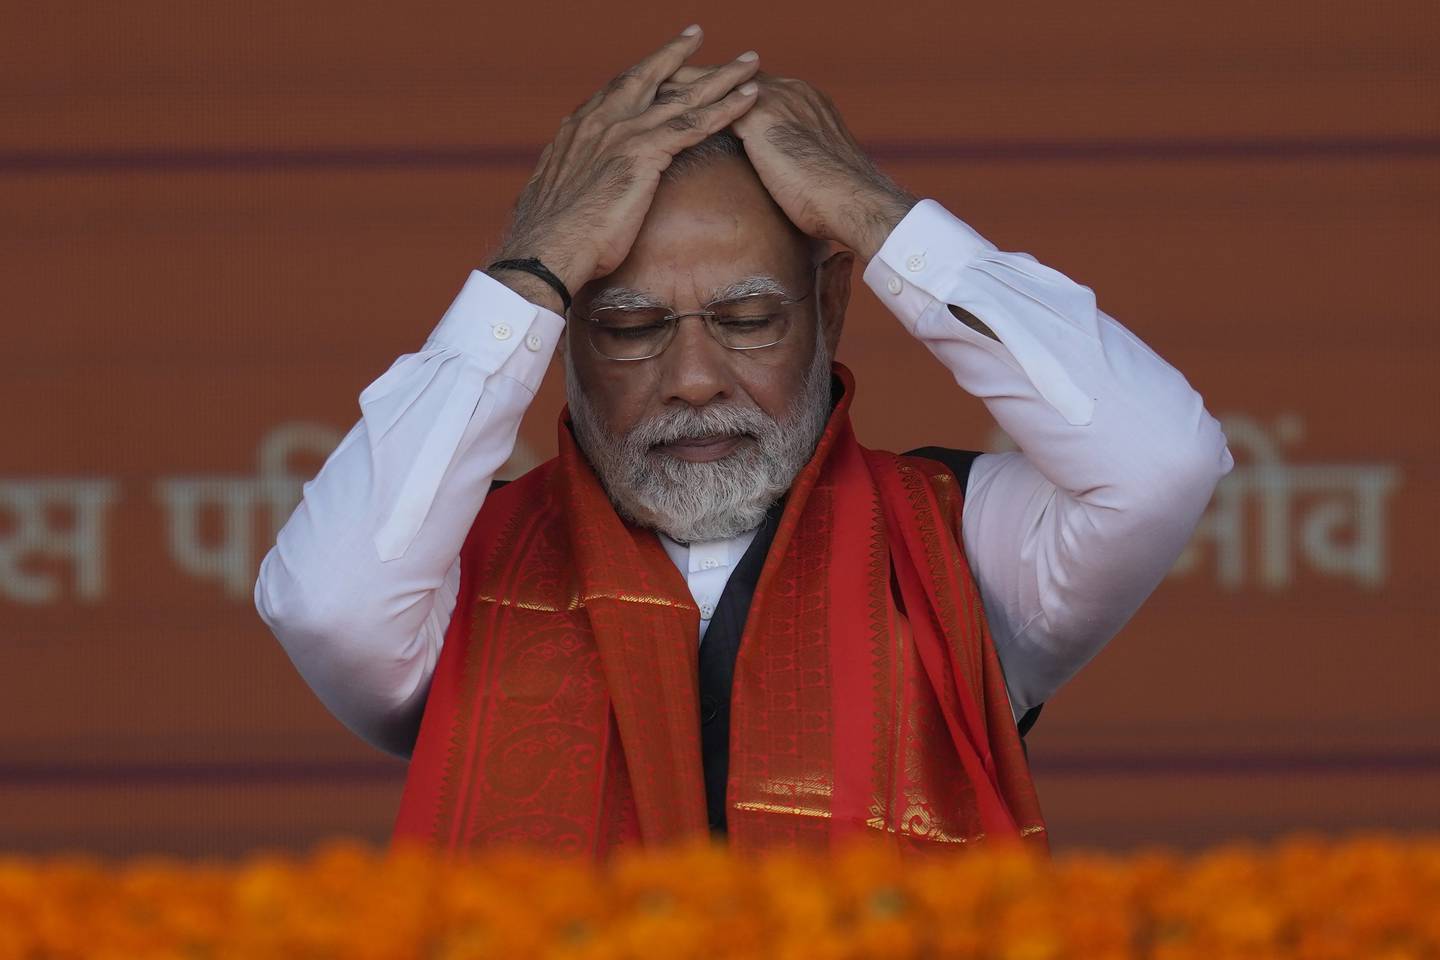 Indian Prime Minister Narendra Modi adjusts his hair during a rally in Mumbai, India. The Indian leader will host Egyptian President Abdel Fattah El Sisi later this week in Ne Delhi. AP